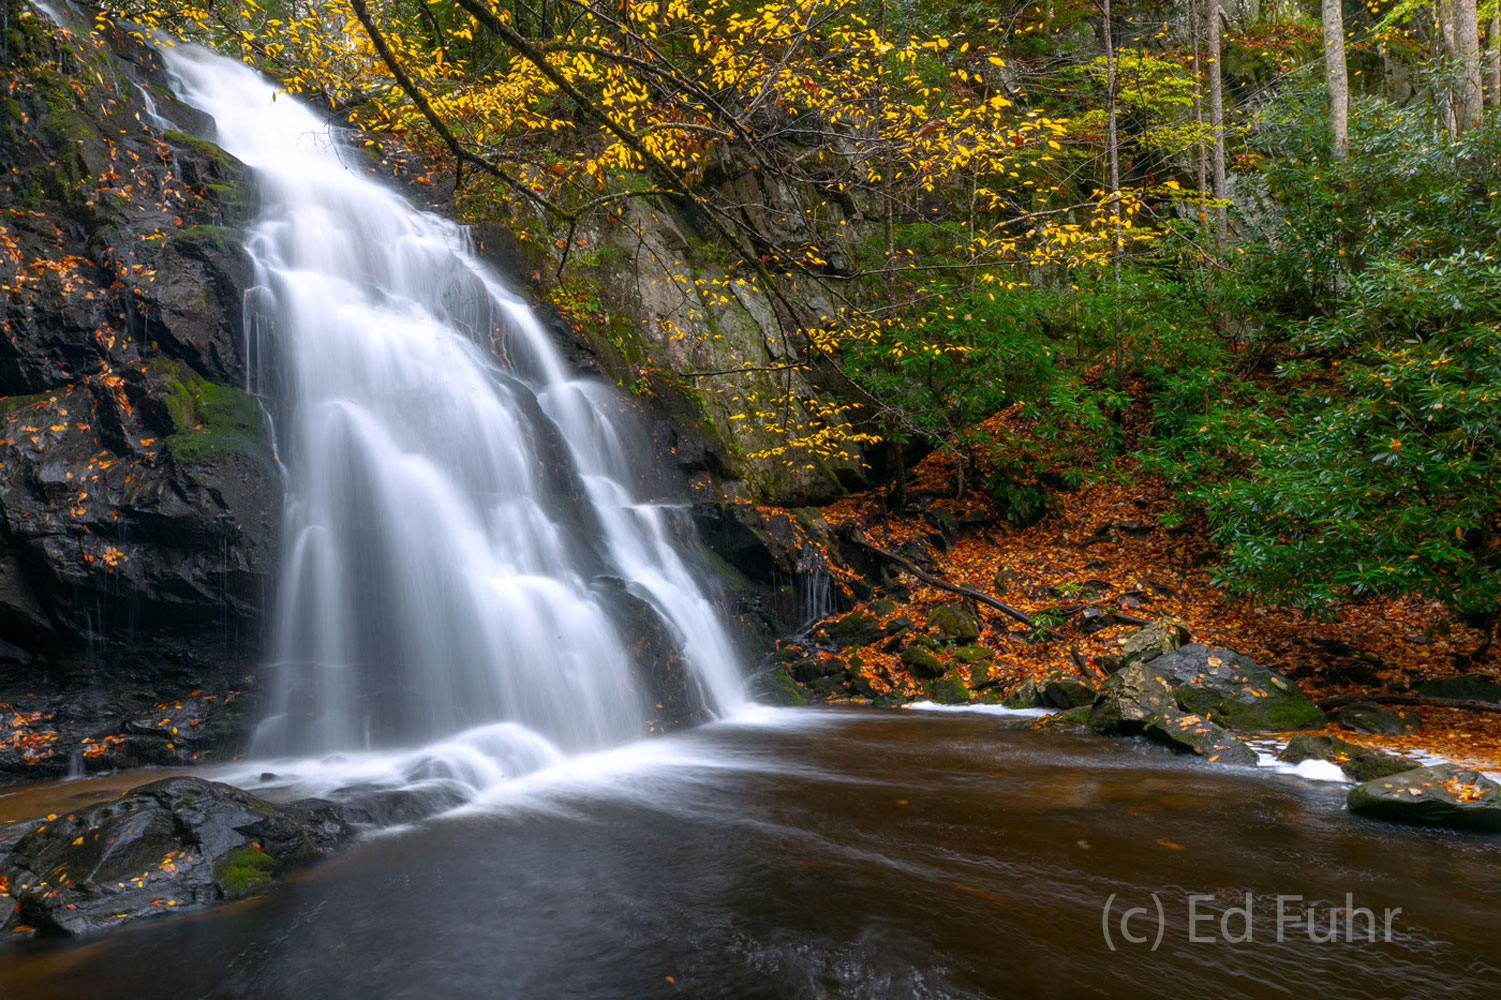 Spruce Flats Falls is undoubtedly one of the most beautiful waterfalls in the Smoky Mountains, especially in fall.